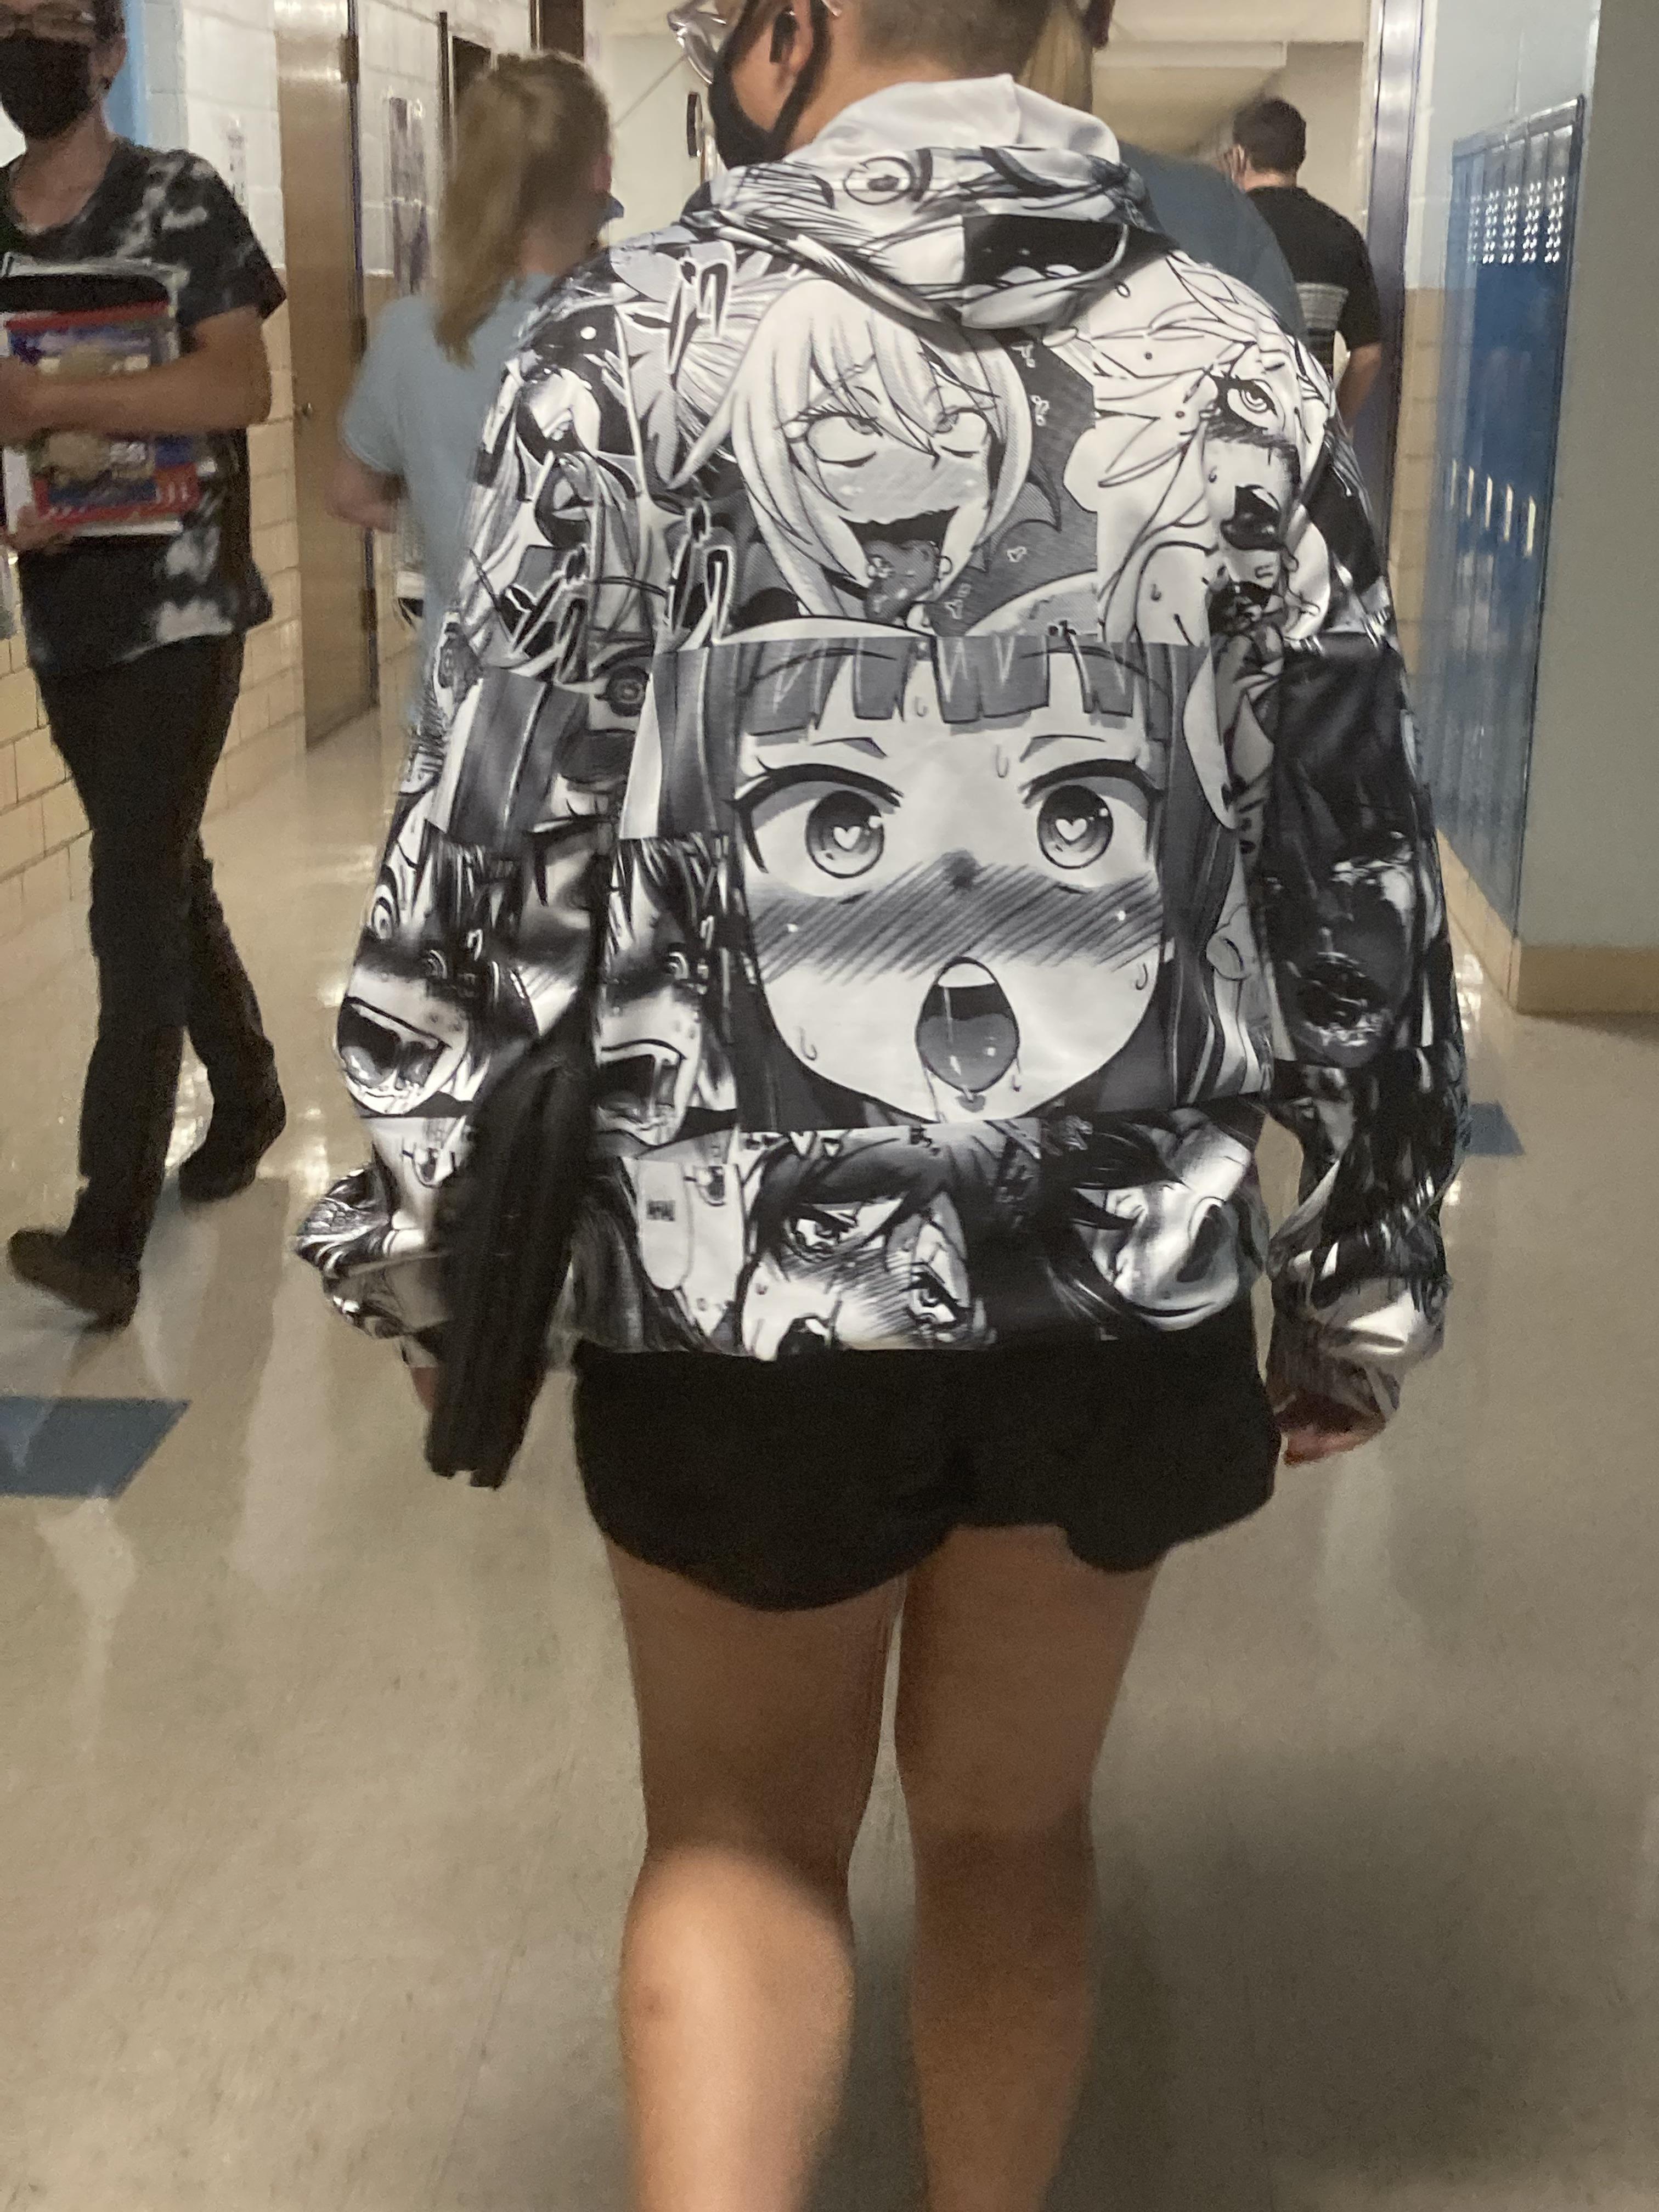 The school got on my sister's case about having a little stomach showing  today, meanwhile one kid wore this | Scrolller